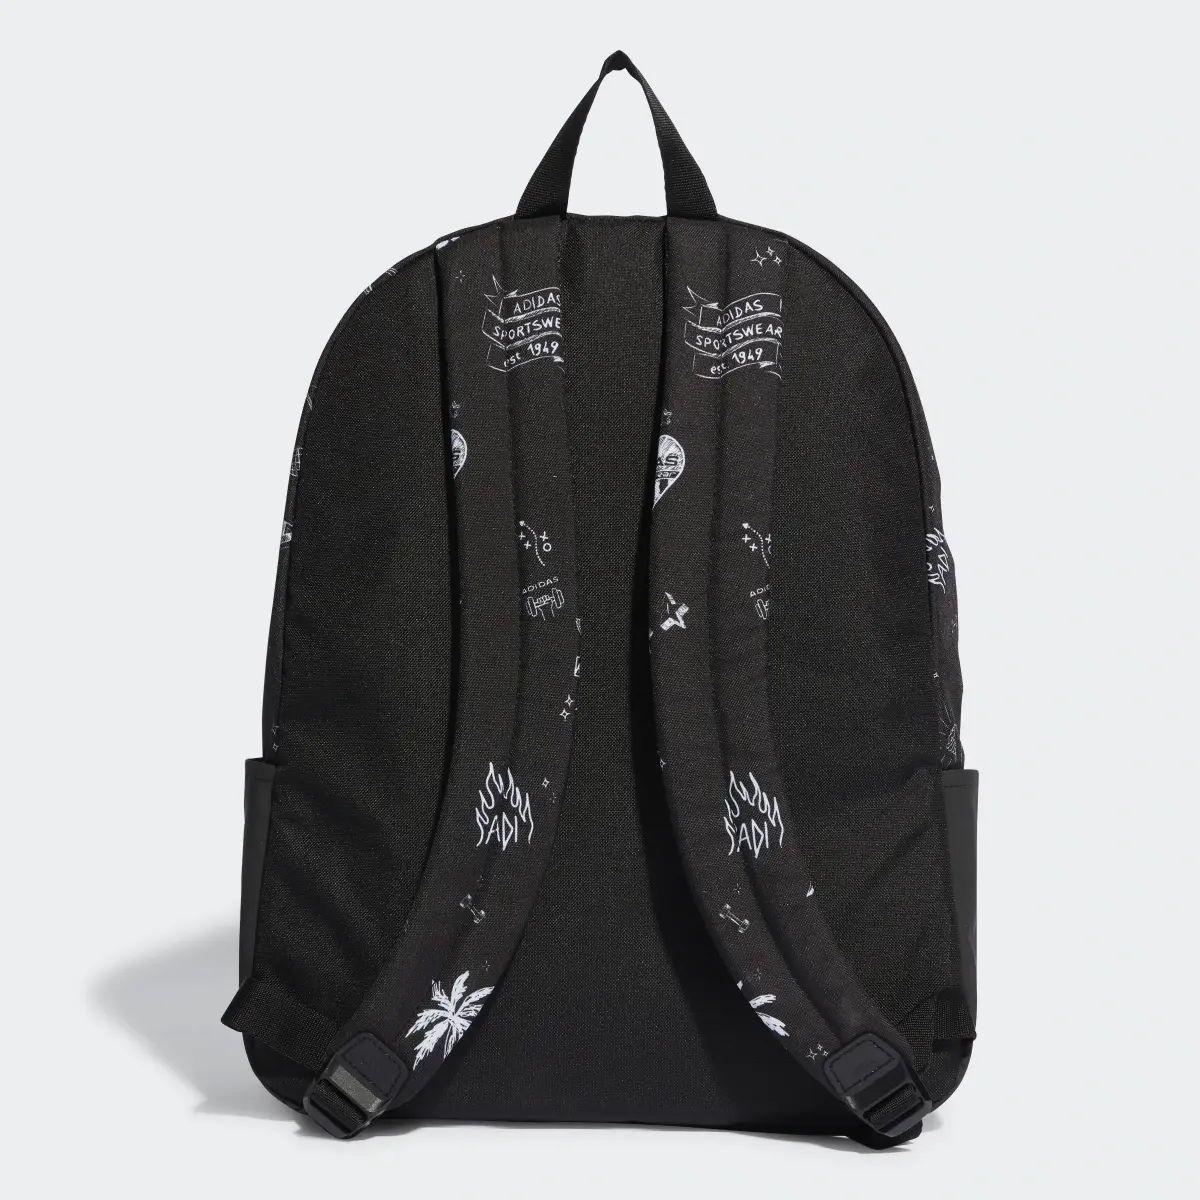 Adidas Classic Backpack. 3